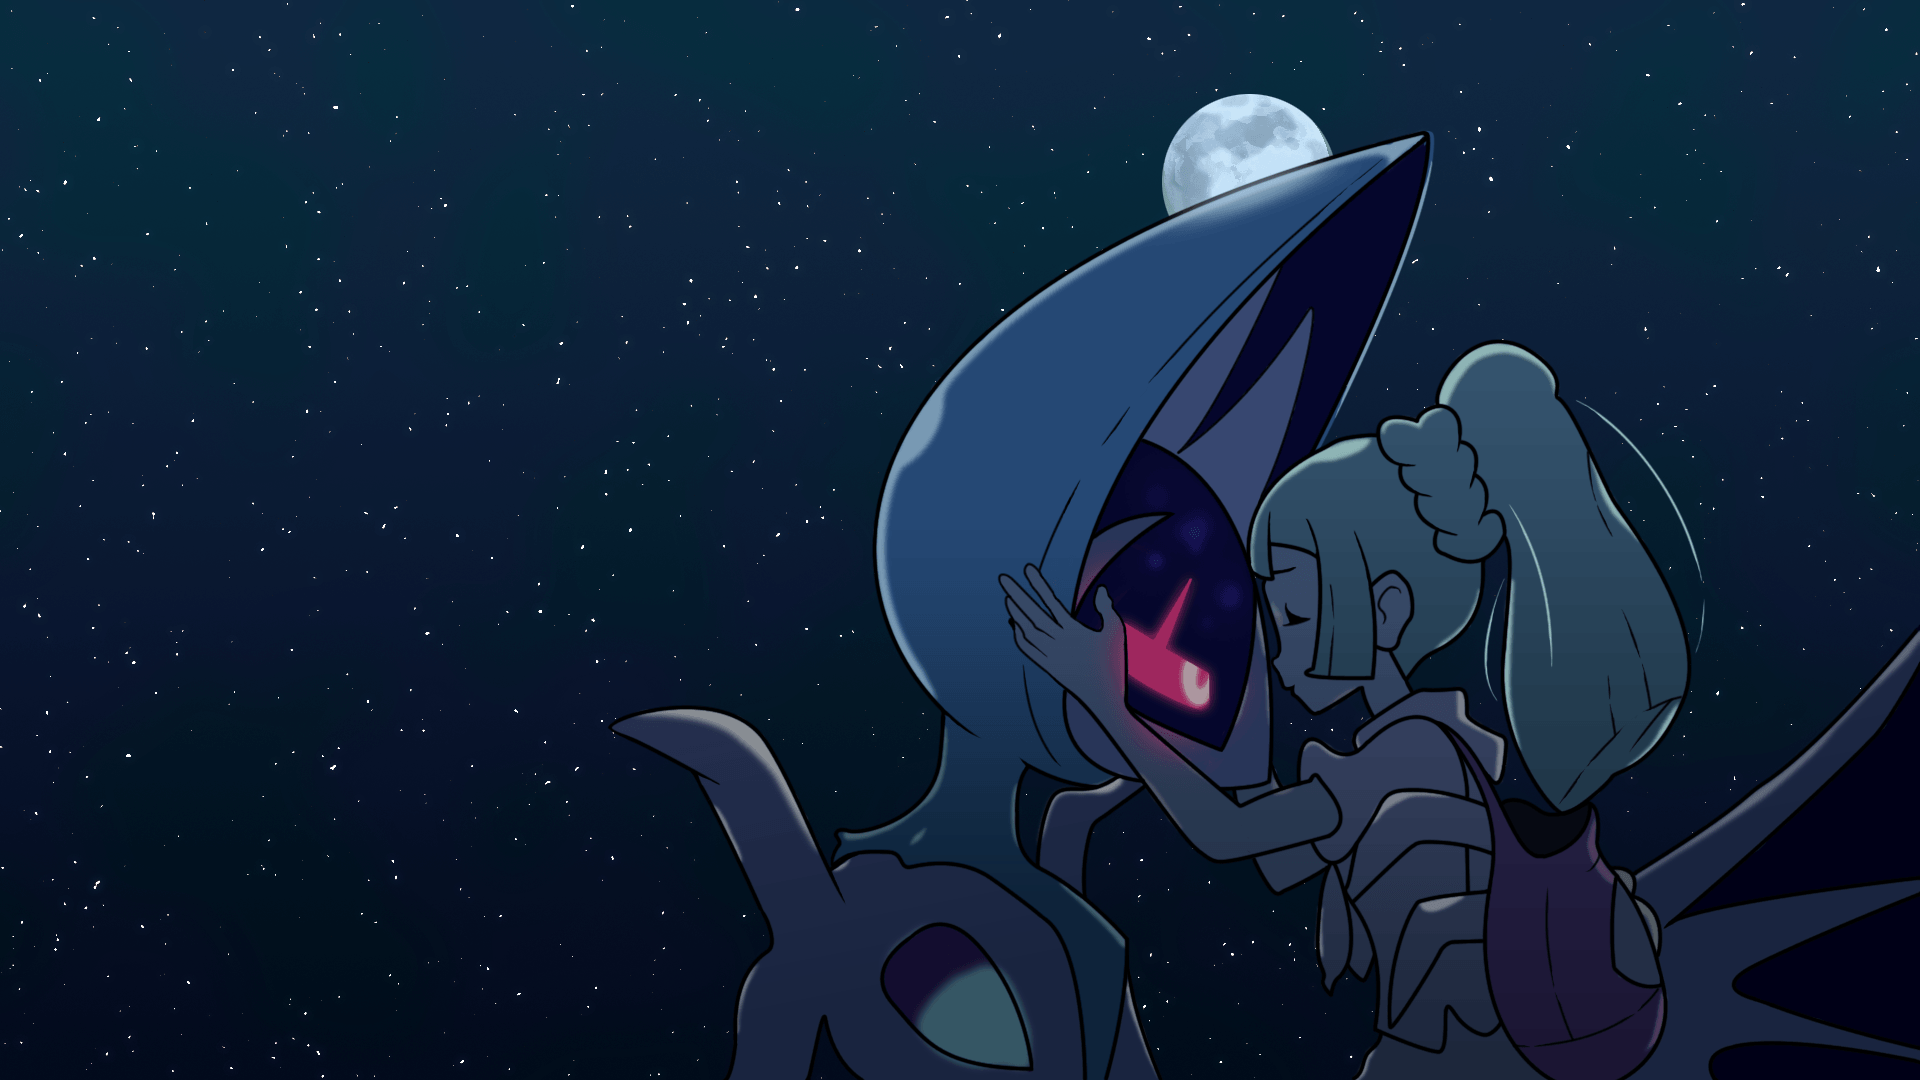 I recreated the credits image of Lillie and Lunala and made a